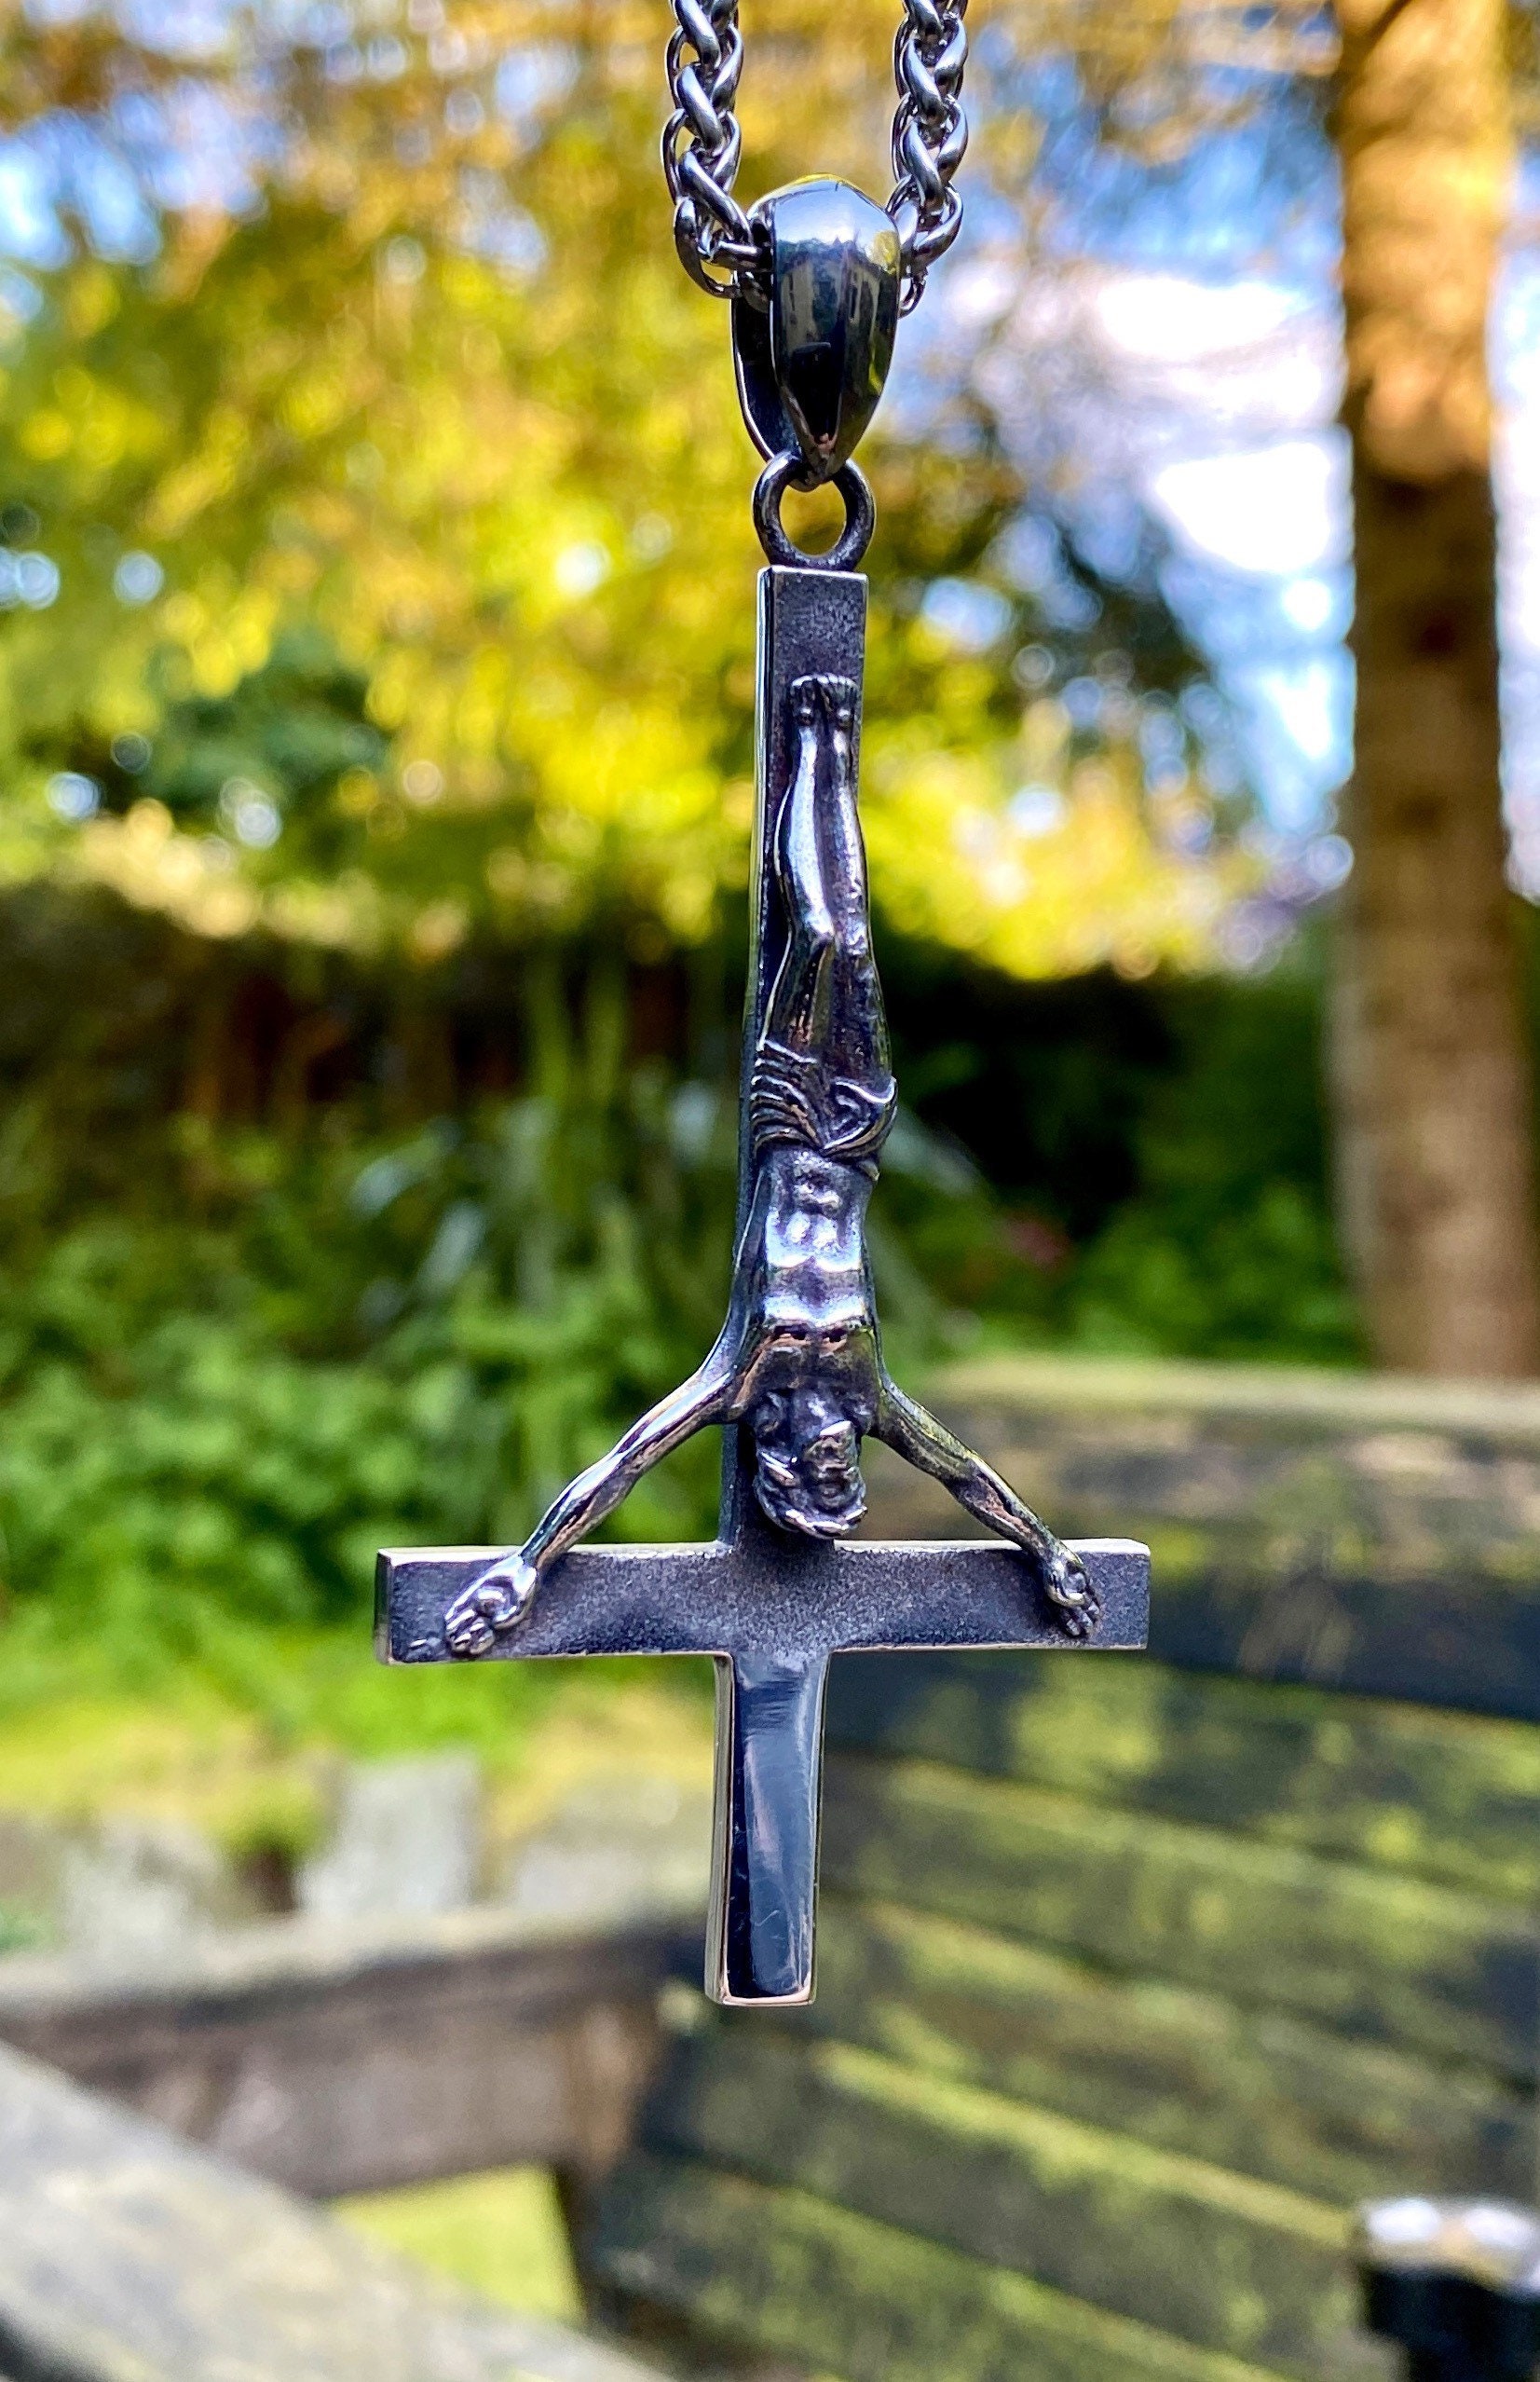 PROSTEEL Black Inverted Cross Necklace,Upside Down Cross,Goth Statement  Jewelry,Satanic,Occult,Devil,Stainless Steel Pendant & Chain | Amazon.com